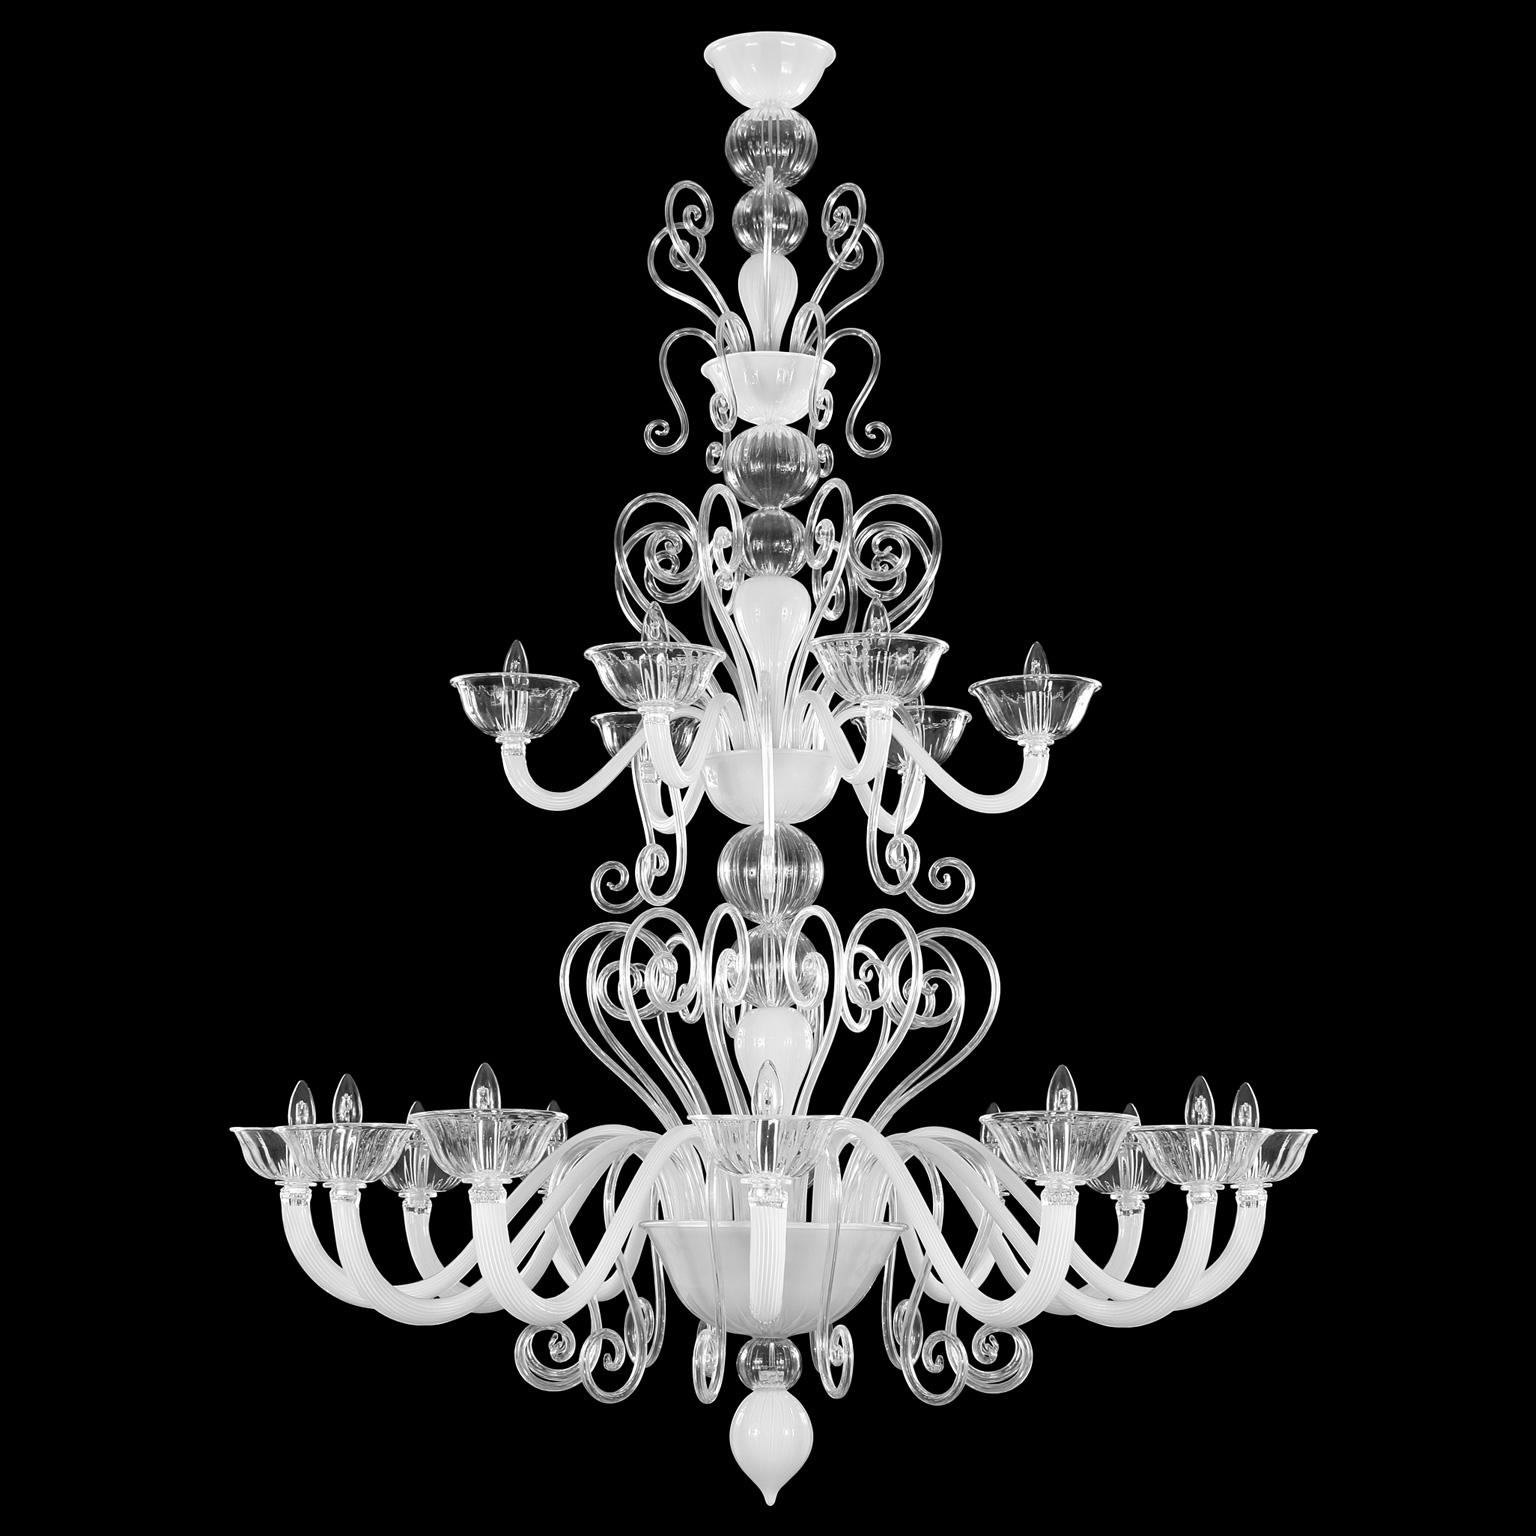 Gatsby naked chandelier 12+6 lights white and clear artistic Murano glass by Multiforme.
The Venetian chandelier Gatsby is the perfect combination of elegant and modern elements. The use of color featuring bright tones, the surface with straight